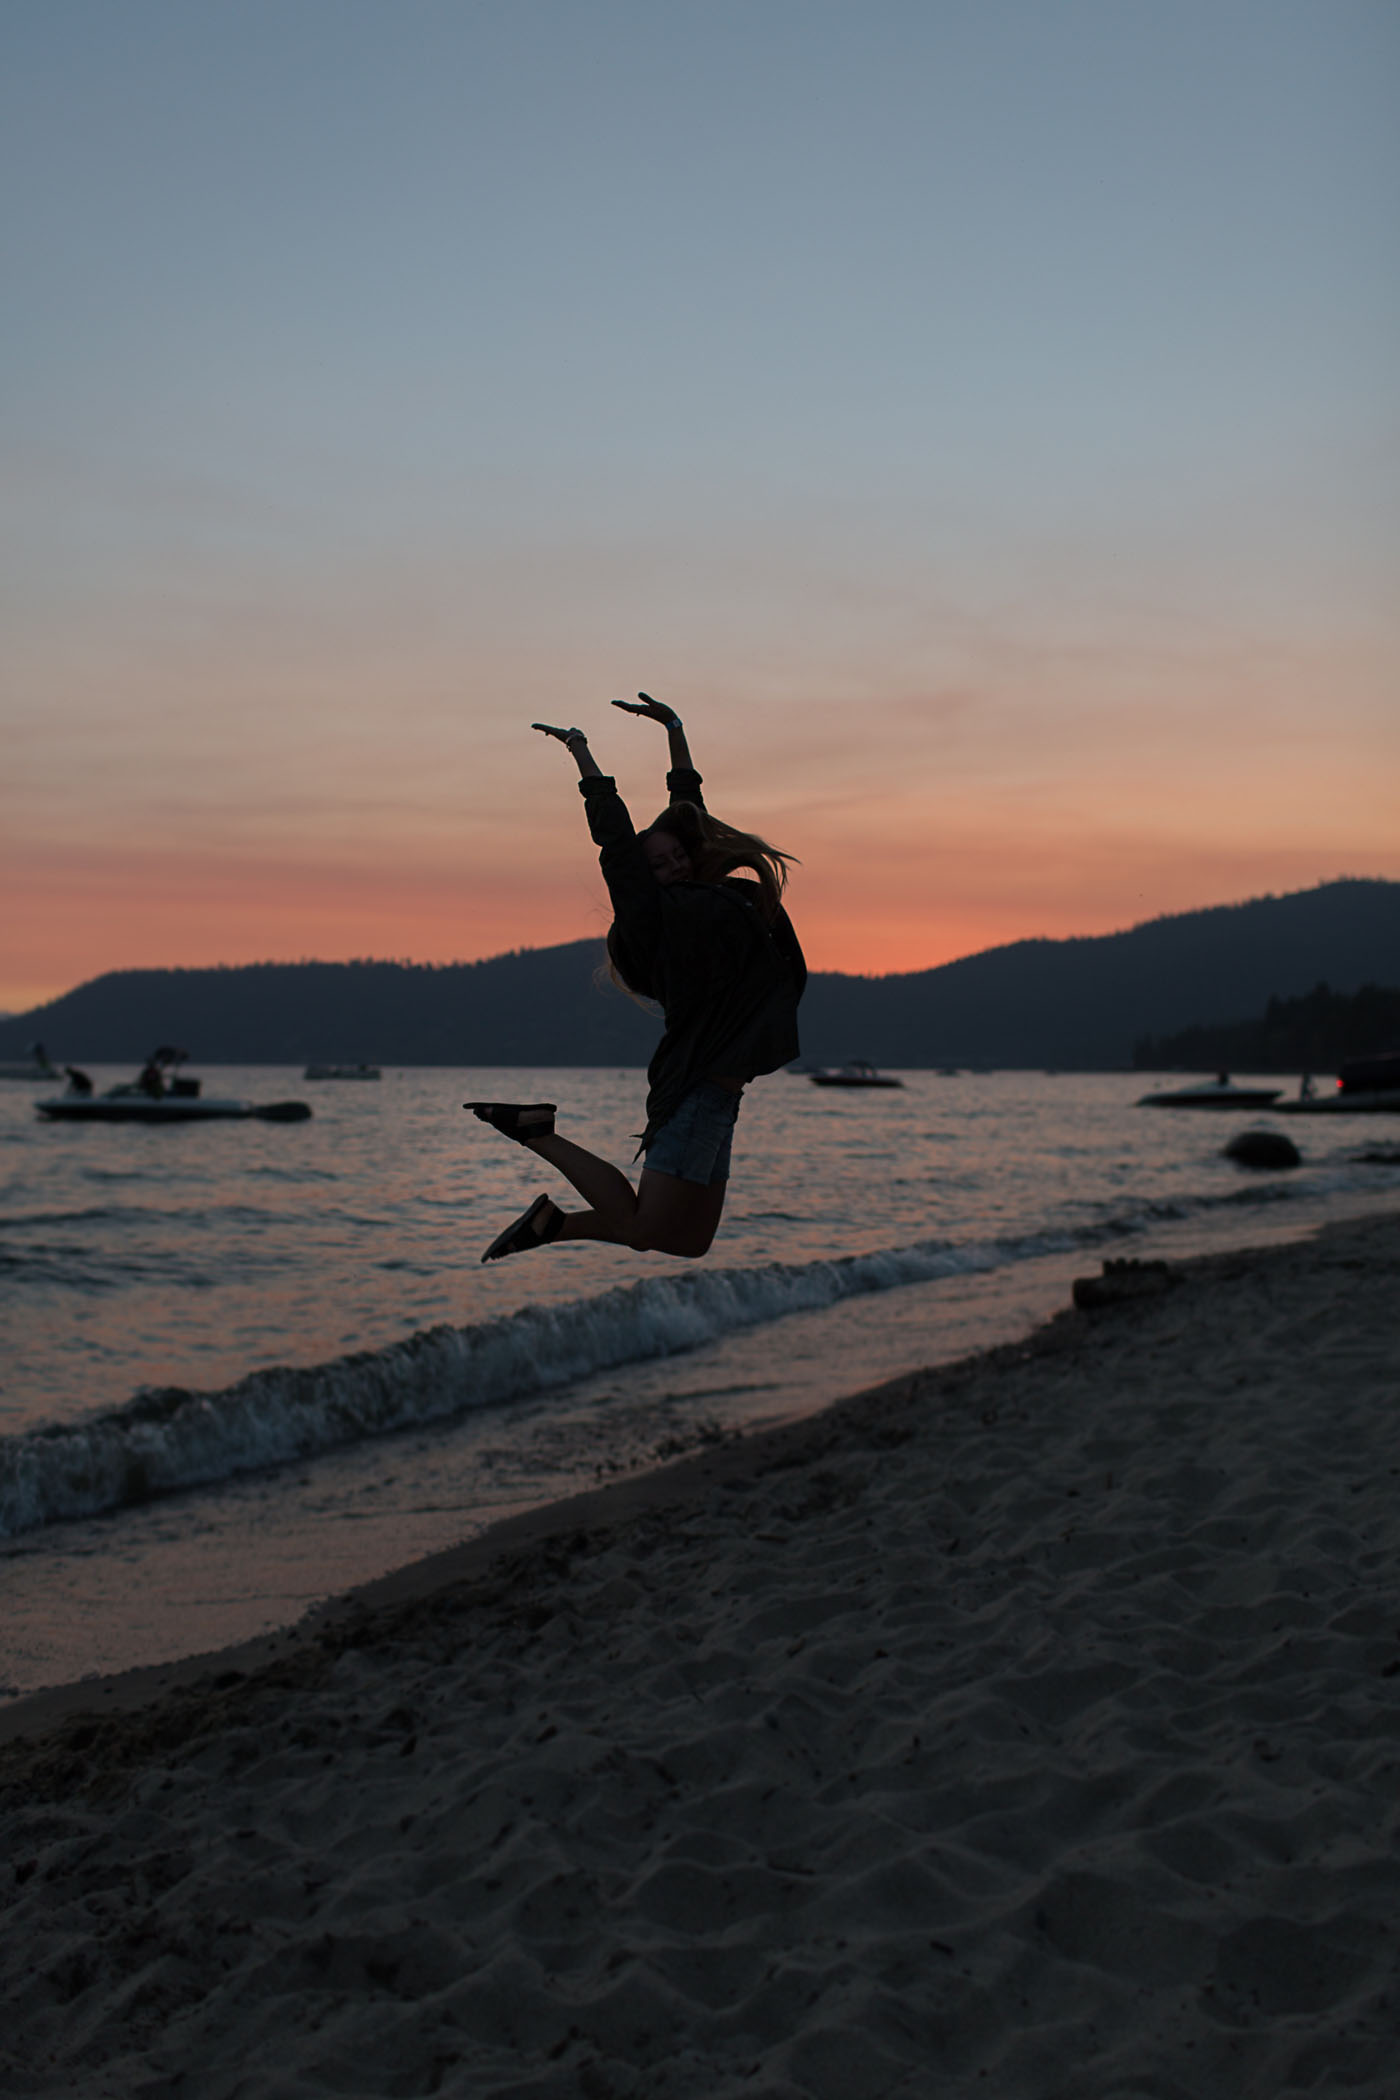 Jumping in the sunset